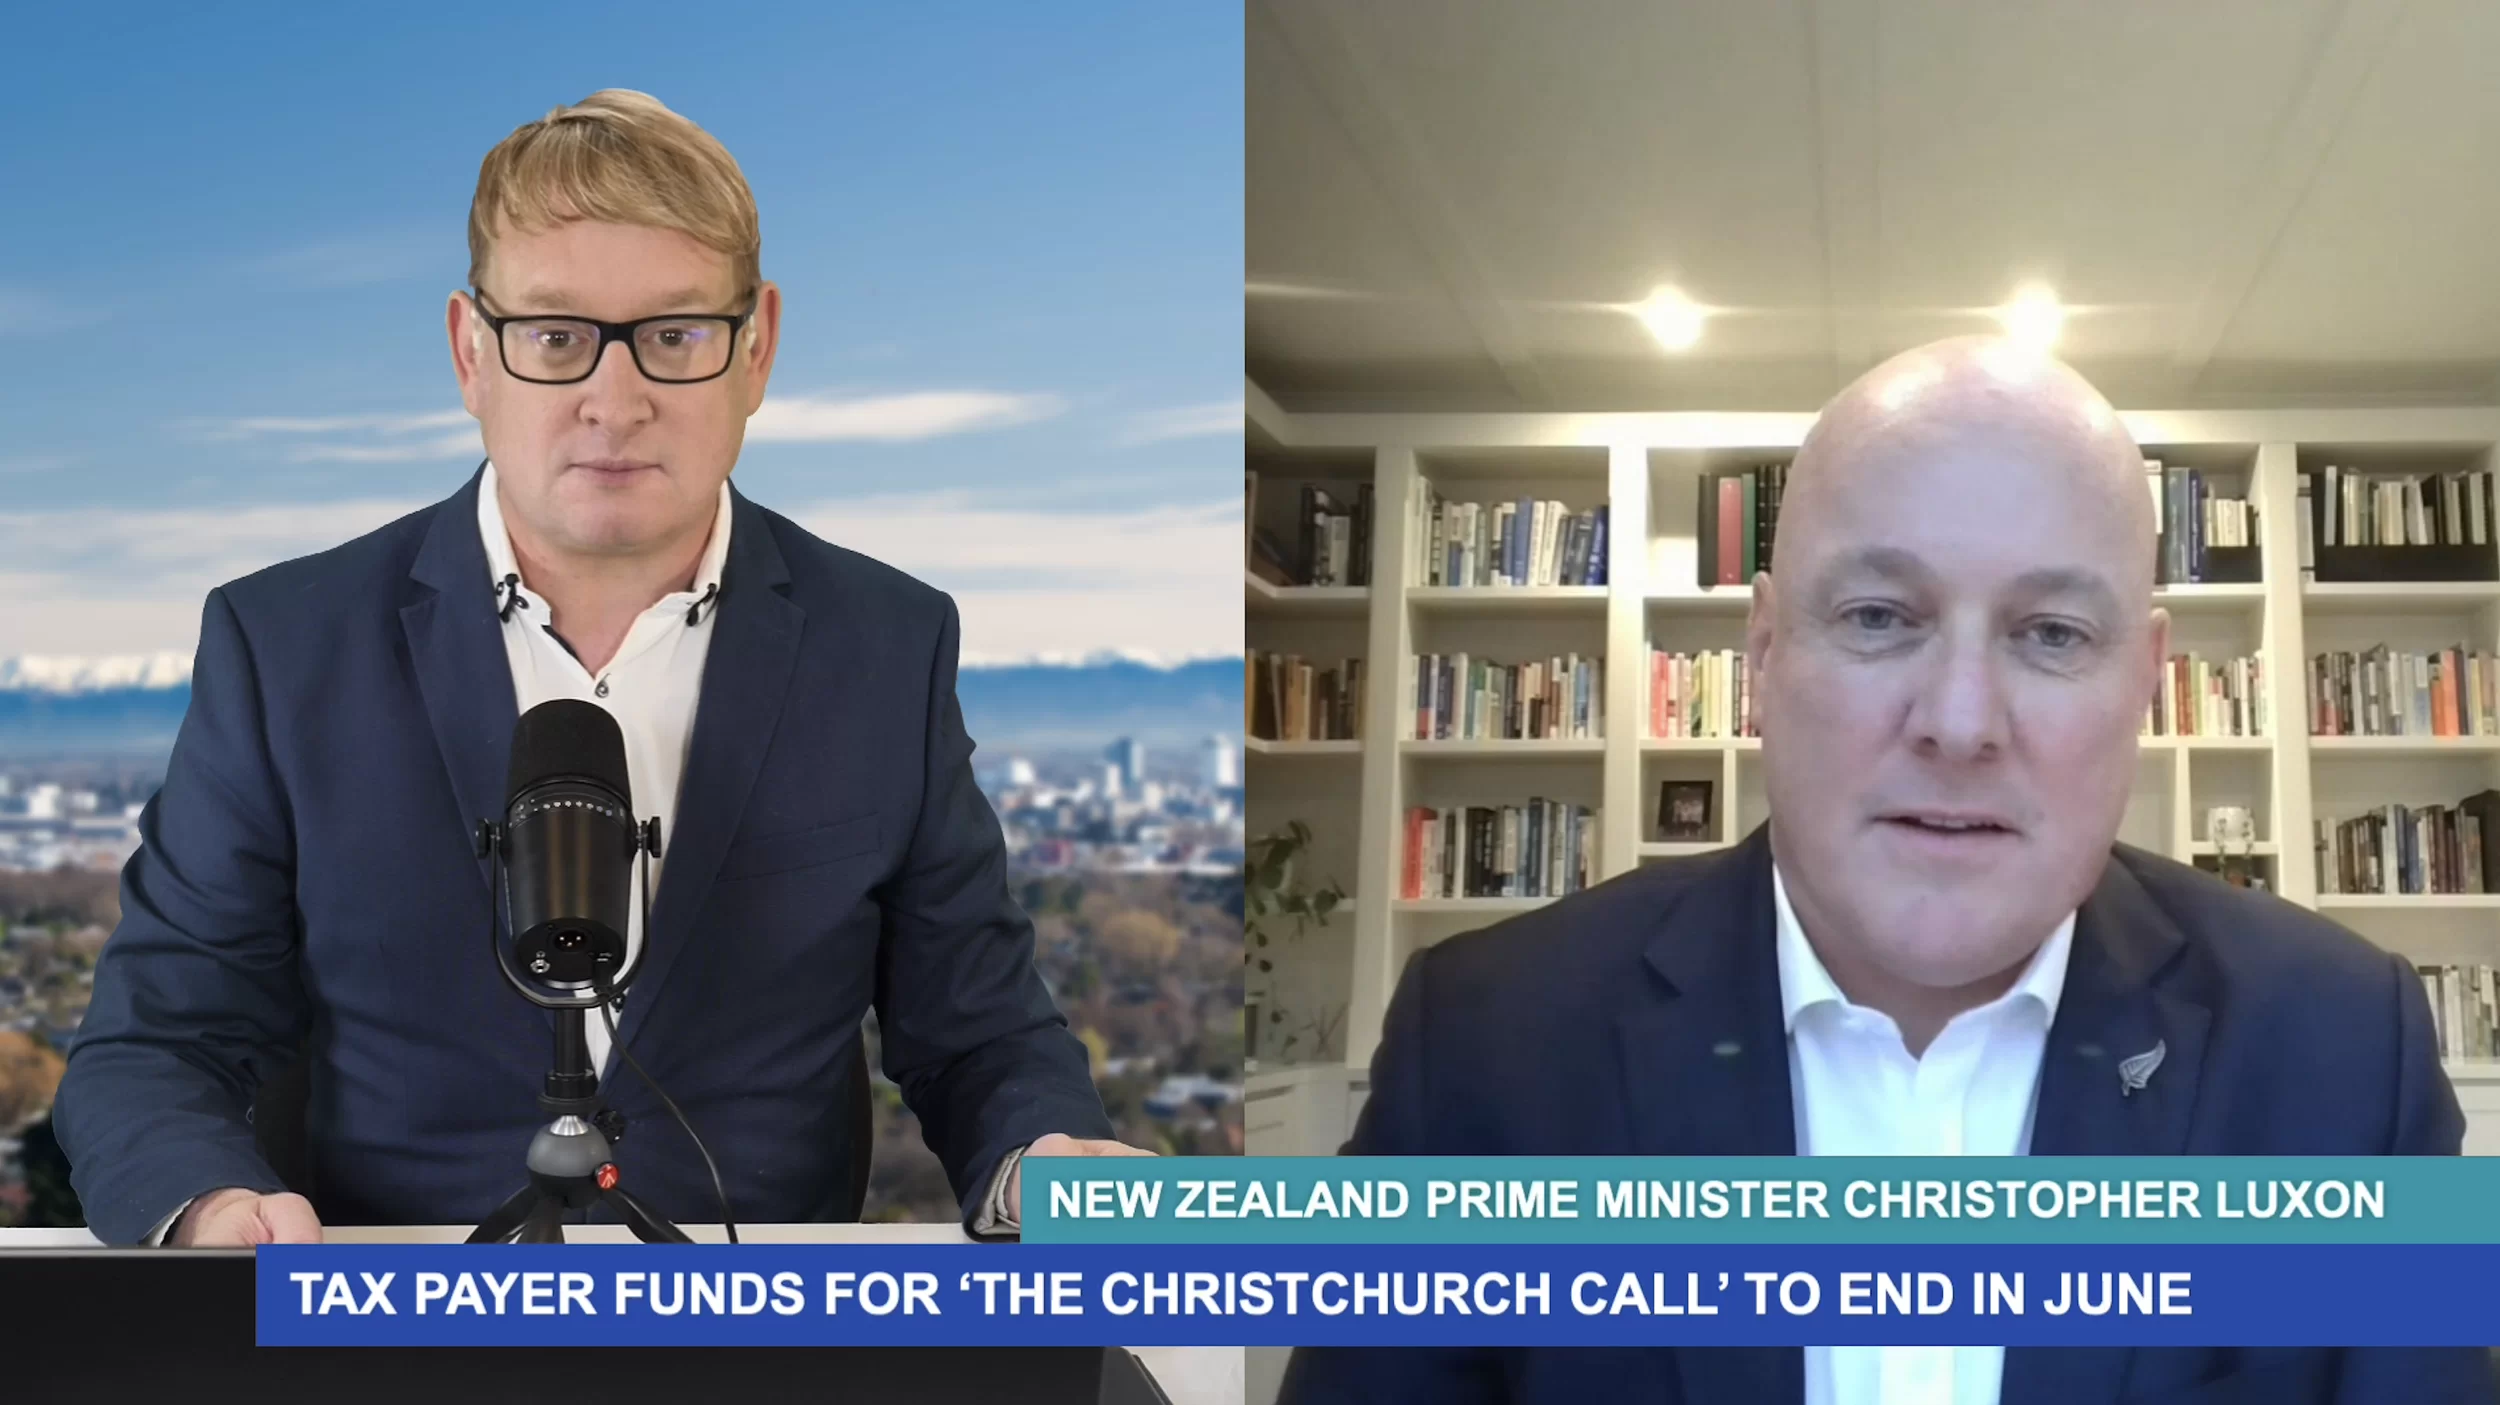 Government to stop funding ‘The Christchurch Call’